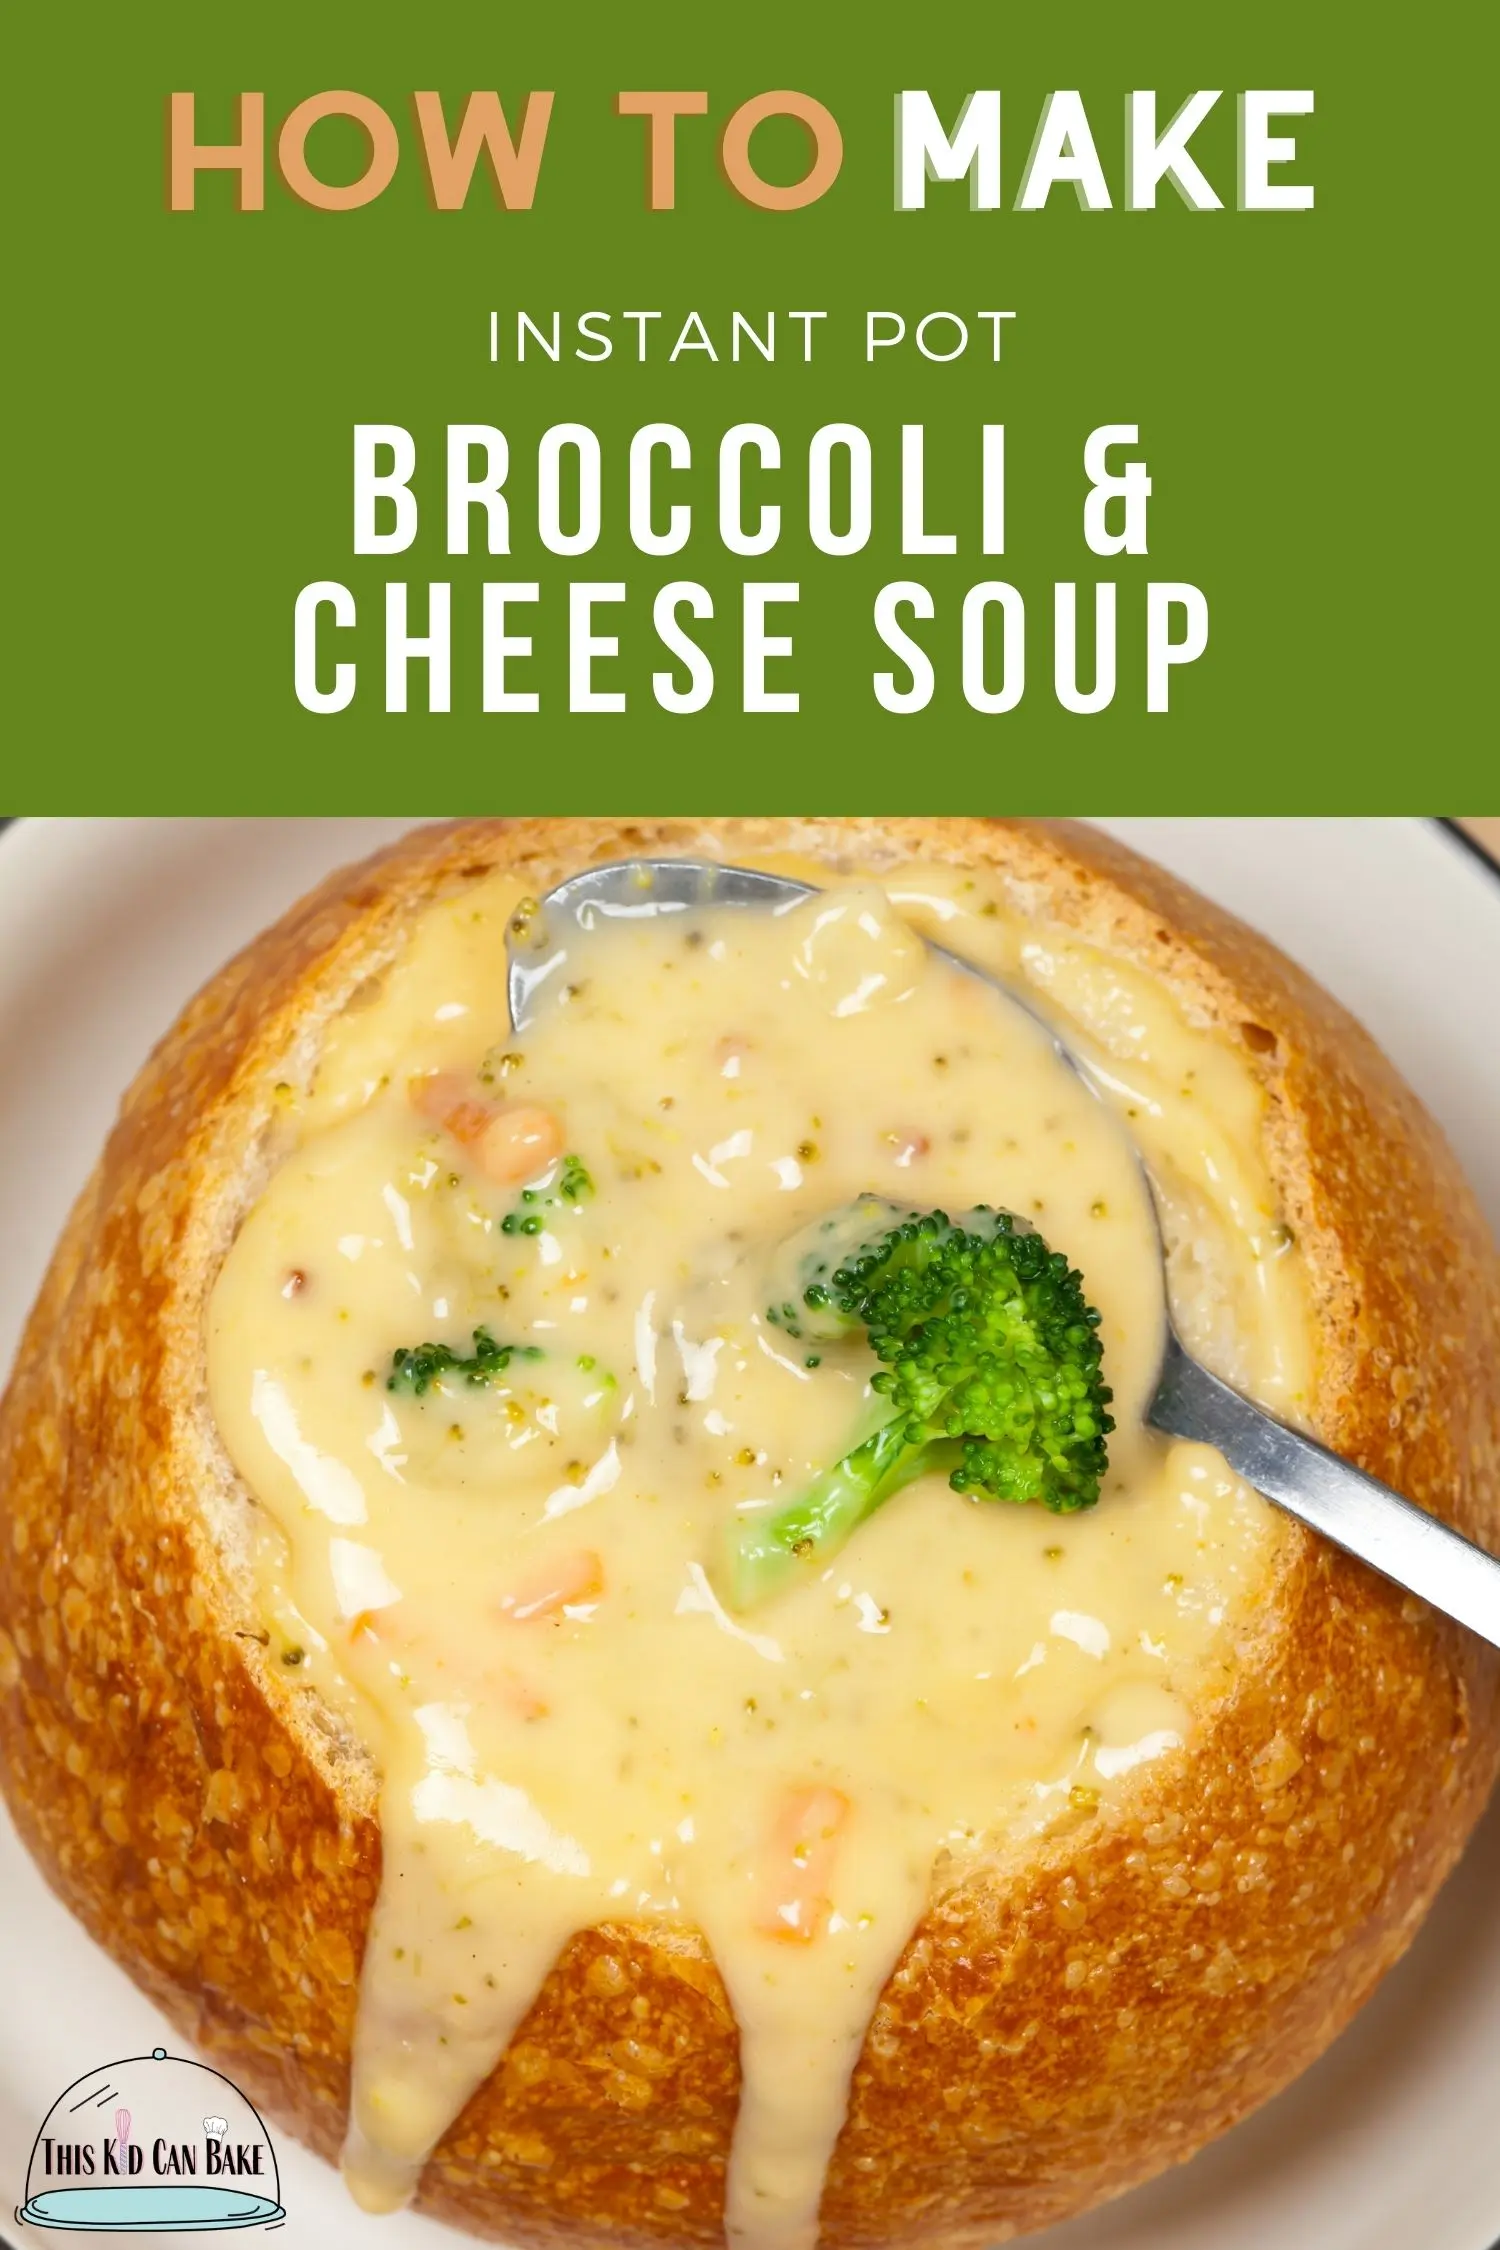 A picture of broccoli and cheese soup in a bread bowl with a green element box that has text that reads "how to make instant pot broccoli and cheese soup".